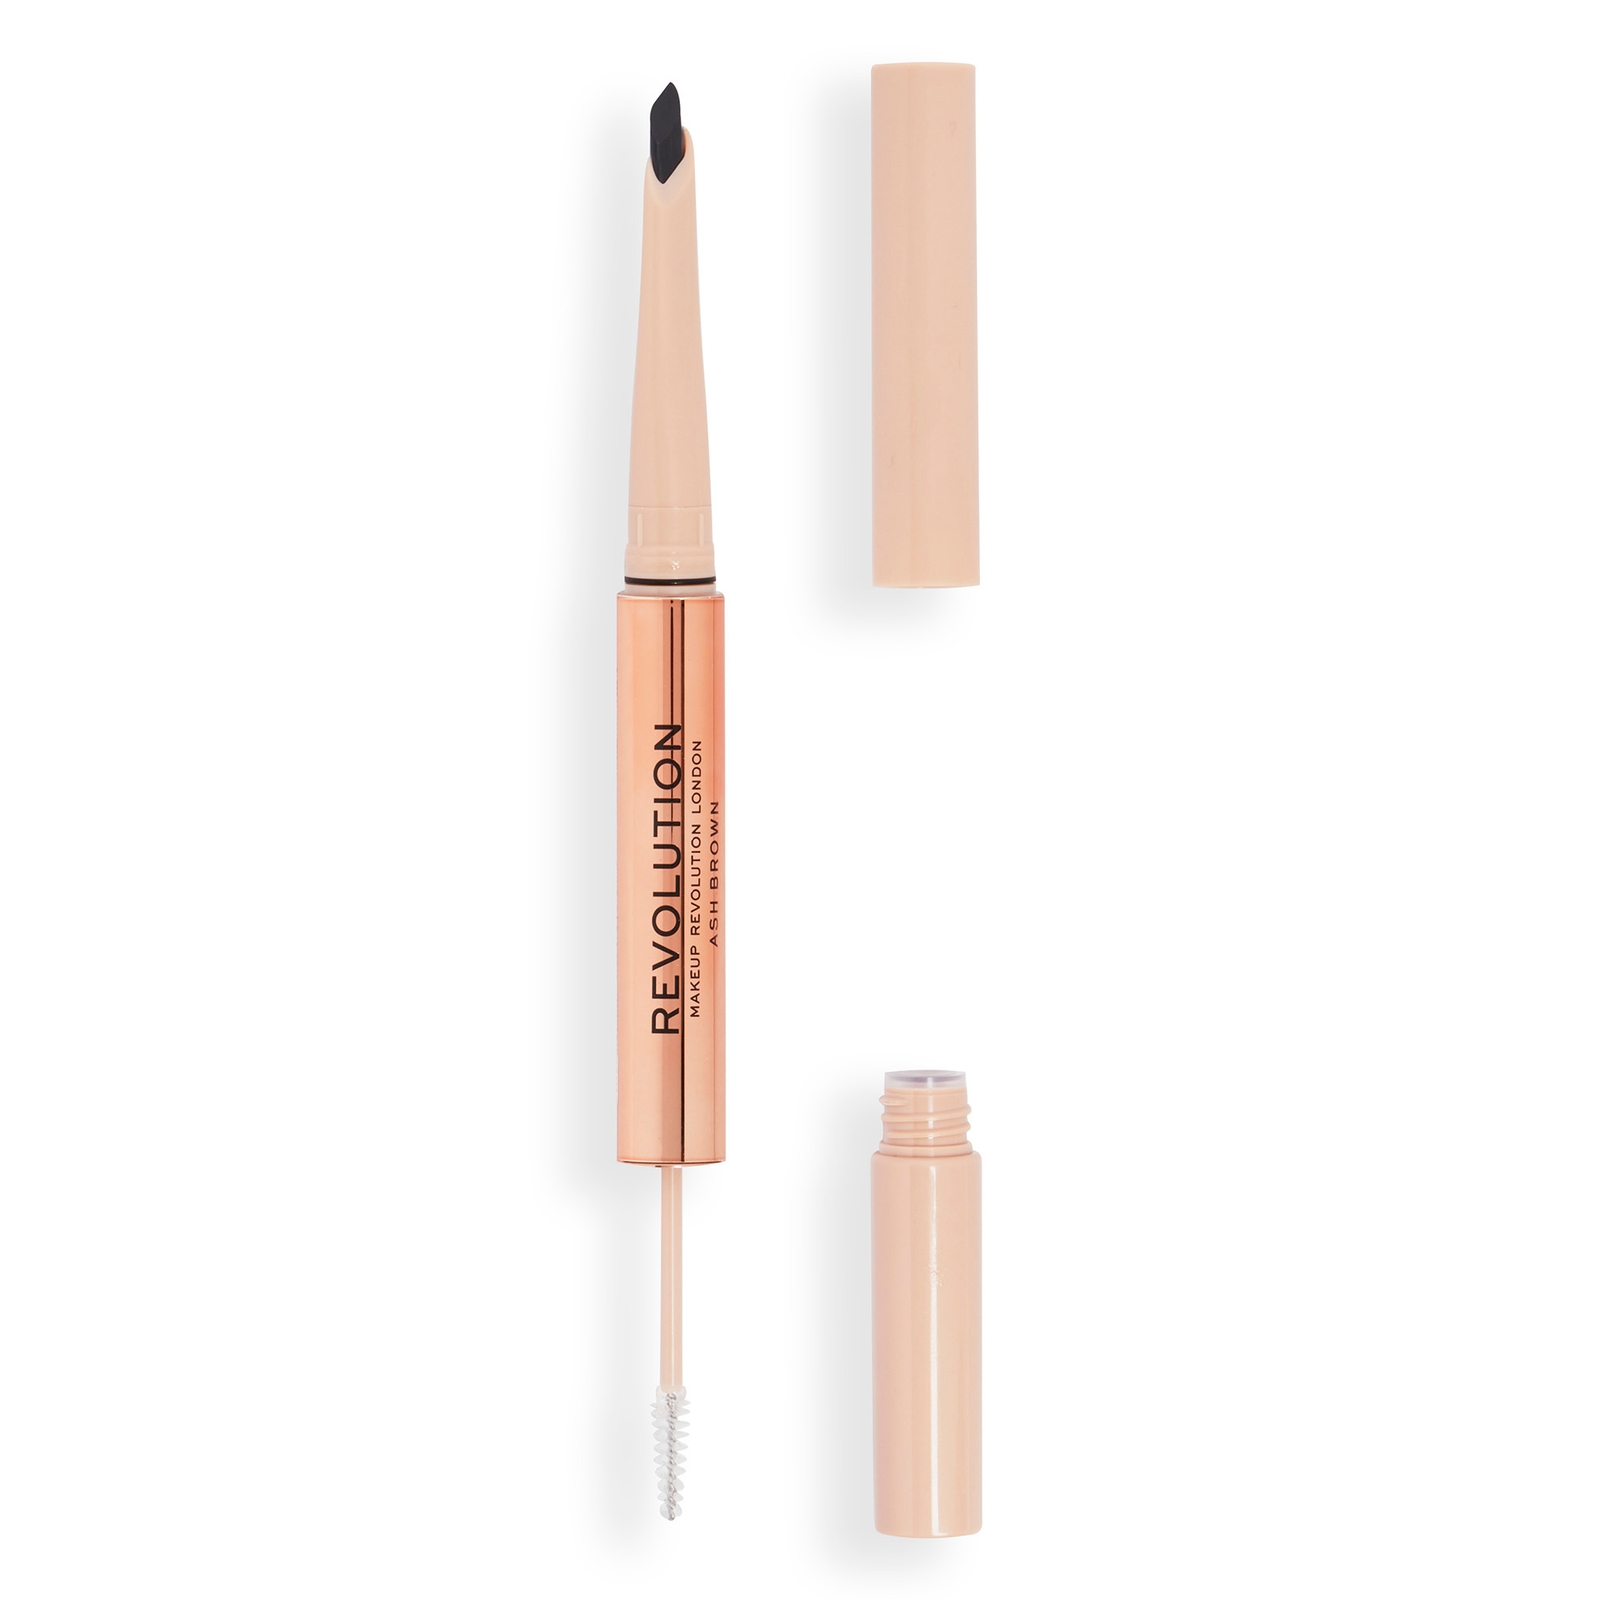 Image of Makeup Revolution Fluffy Brow Duo Blonde - Ash Brown